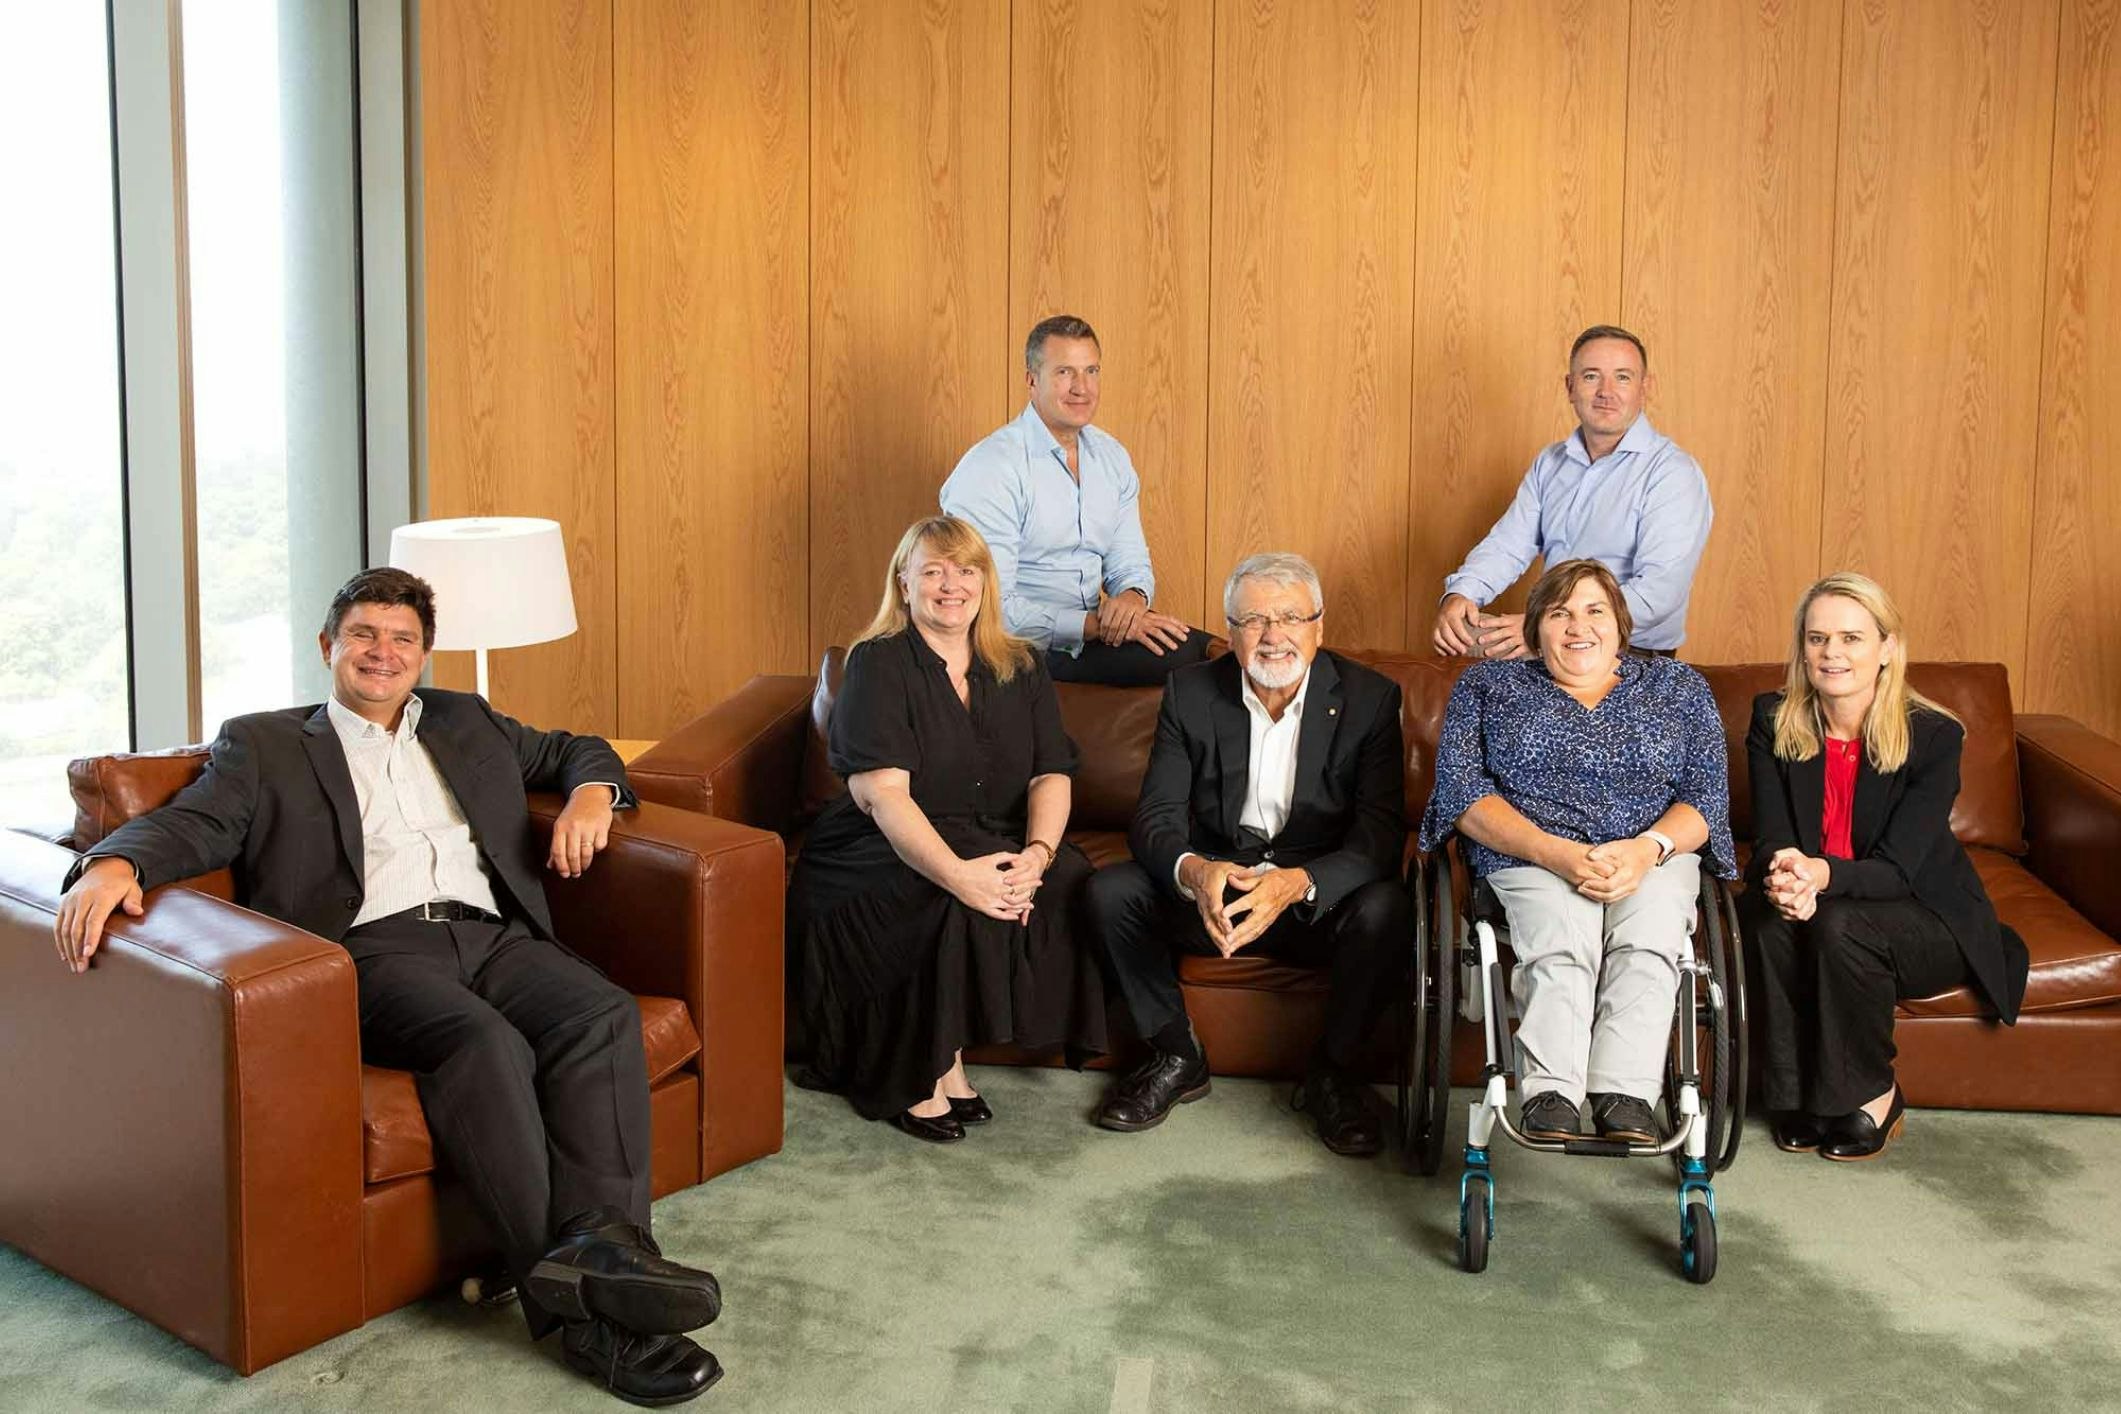 The uLaunch board is made up of people who know what it’s like to find work with disability. [Source: uLaunch]
